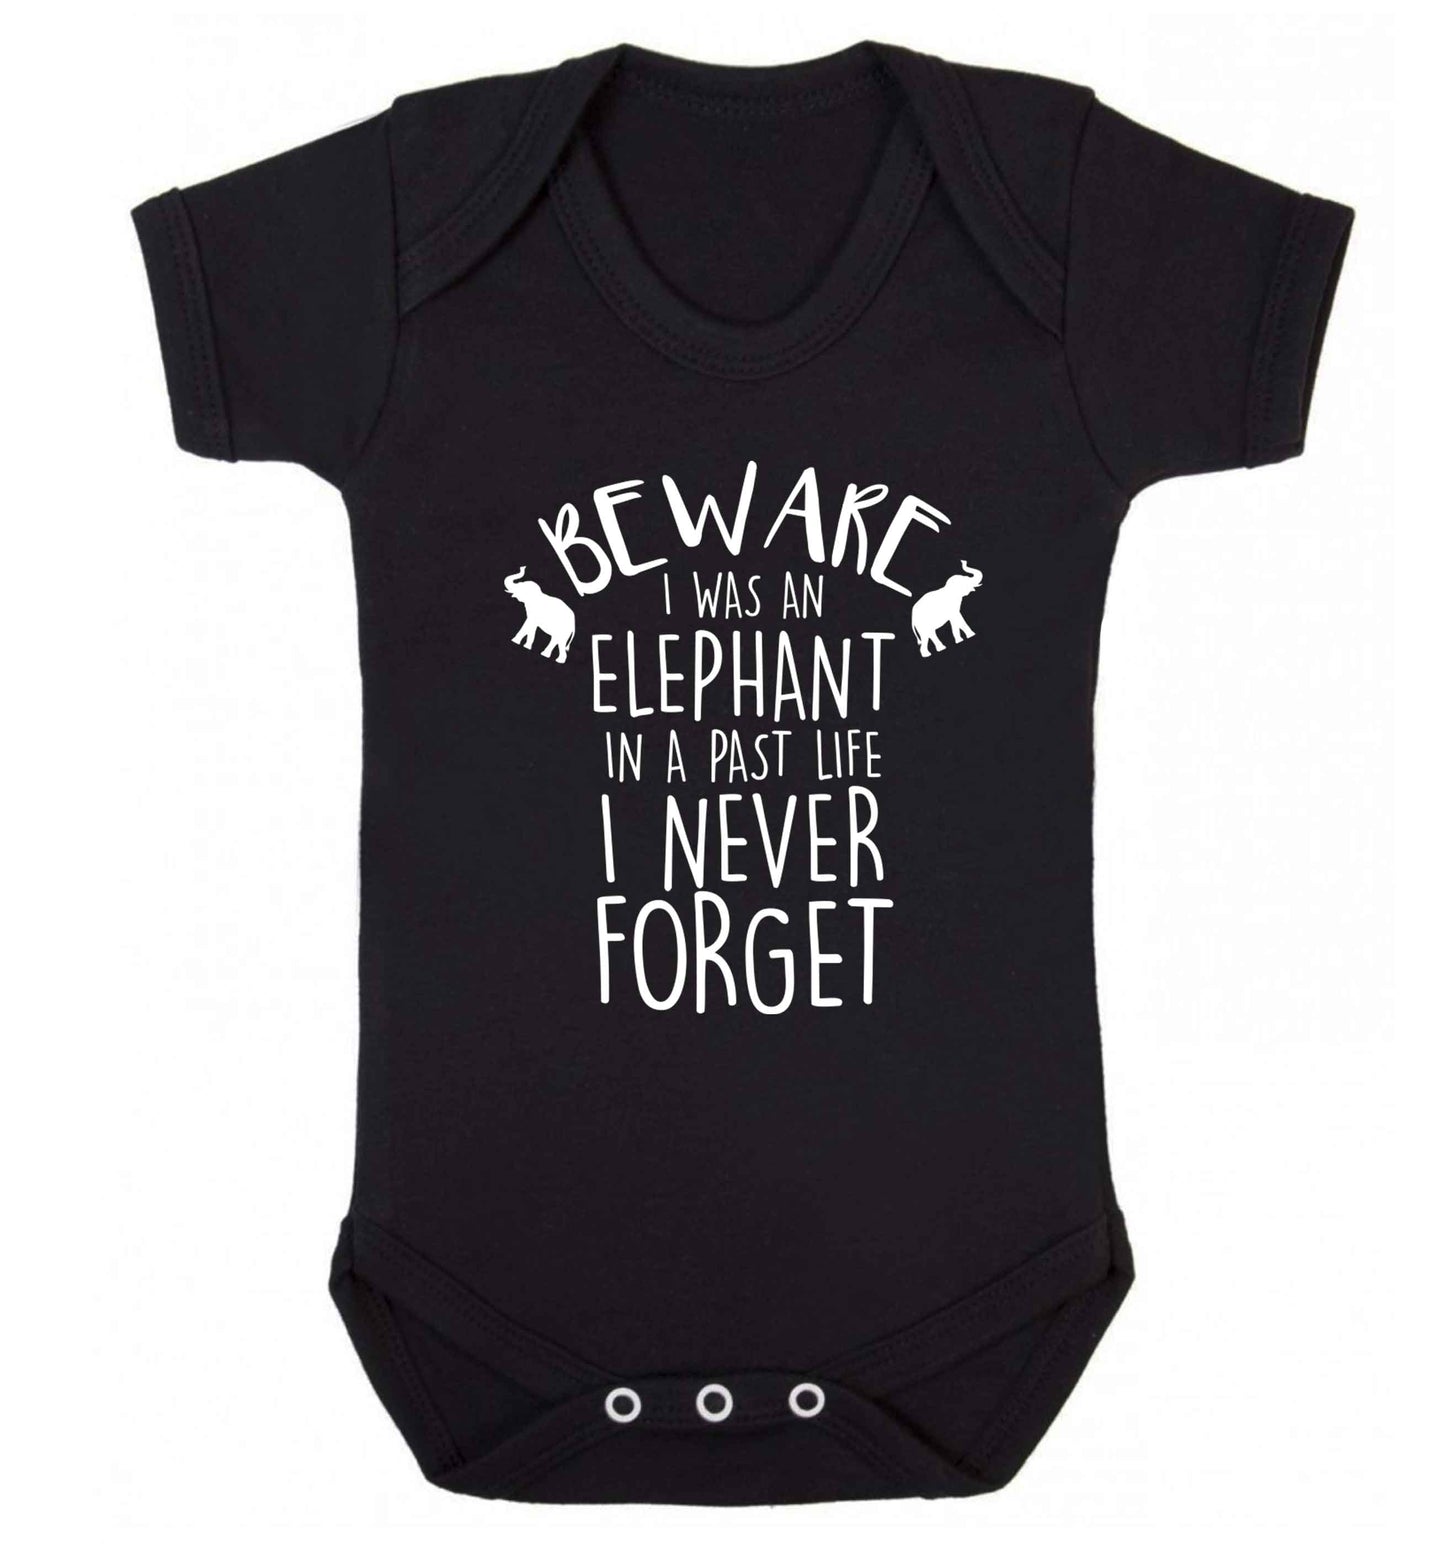 Beware I was an elephant in my past life I never forget Baby Vest black 18-24 months